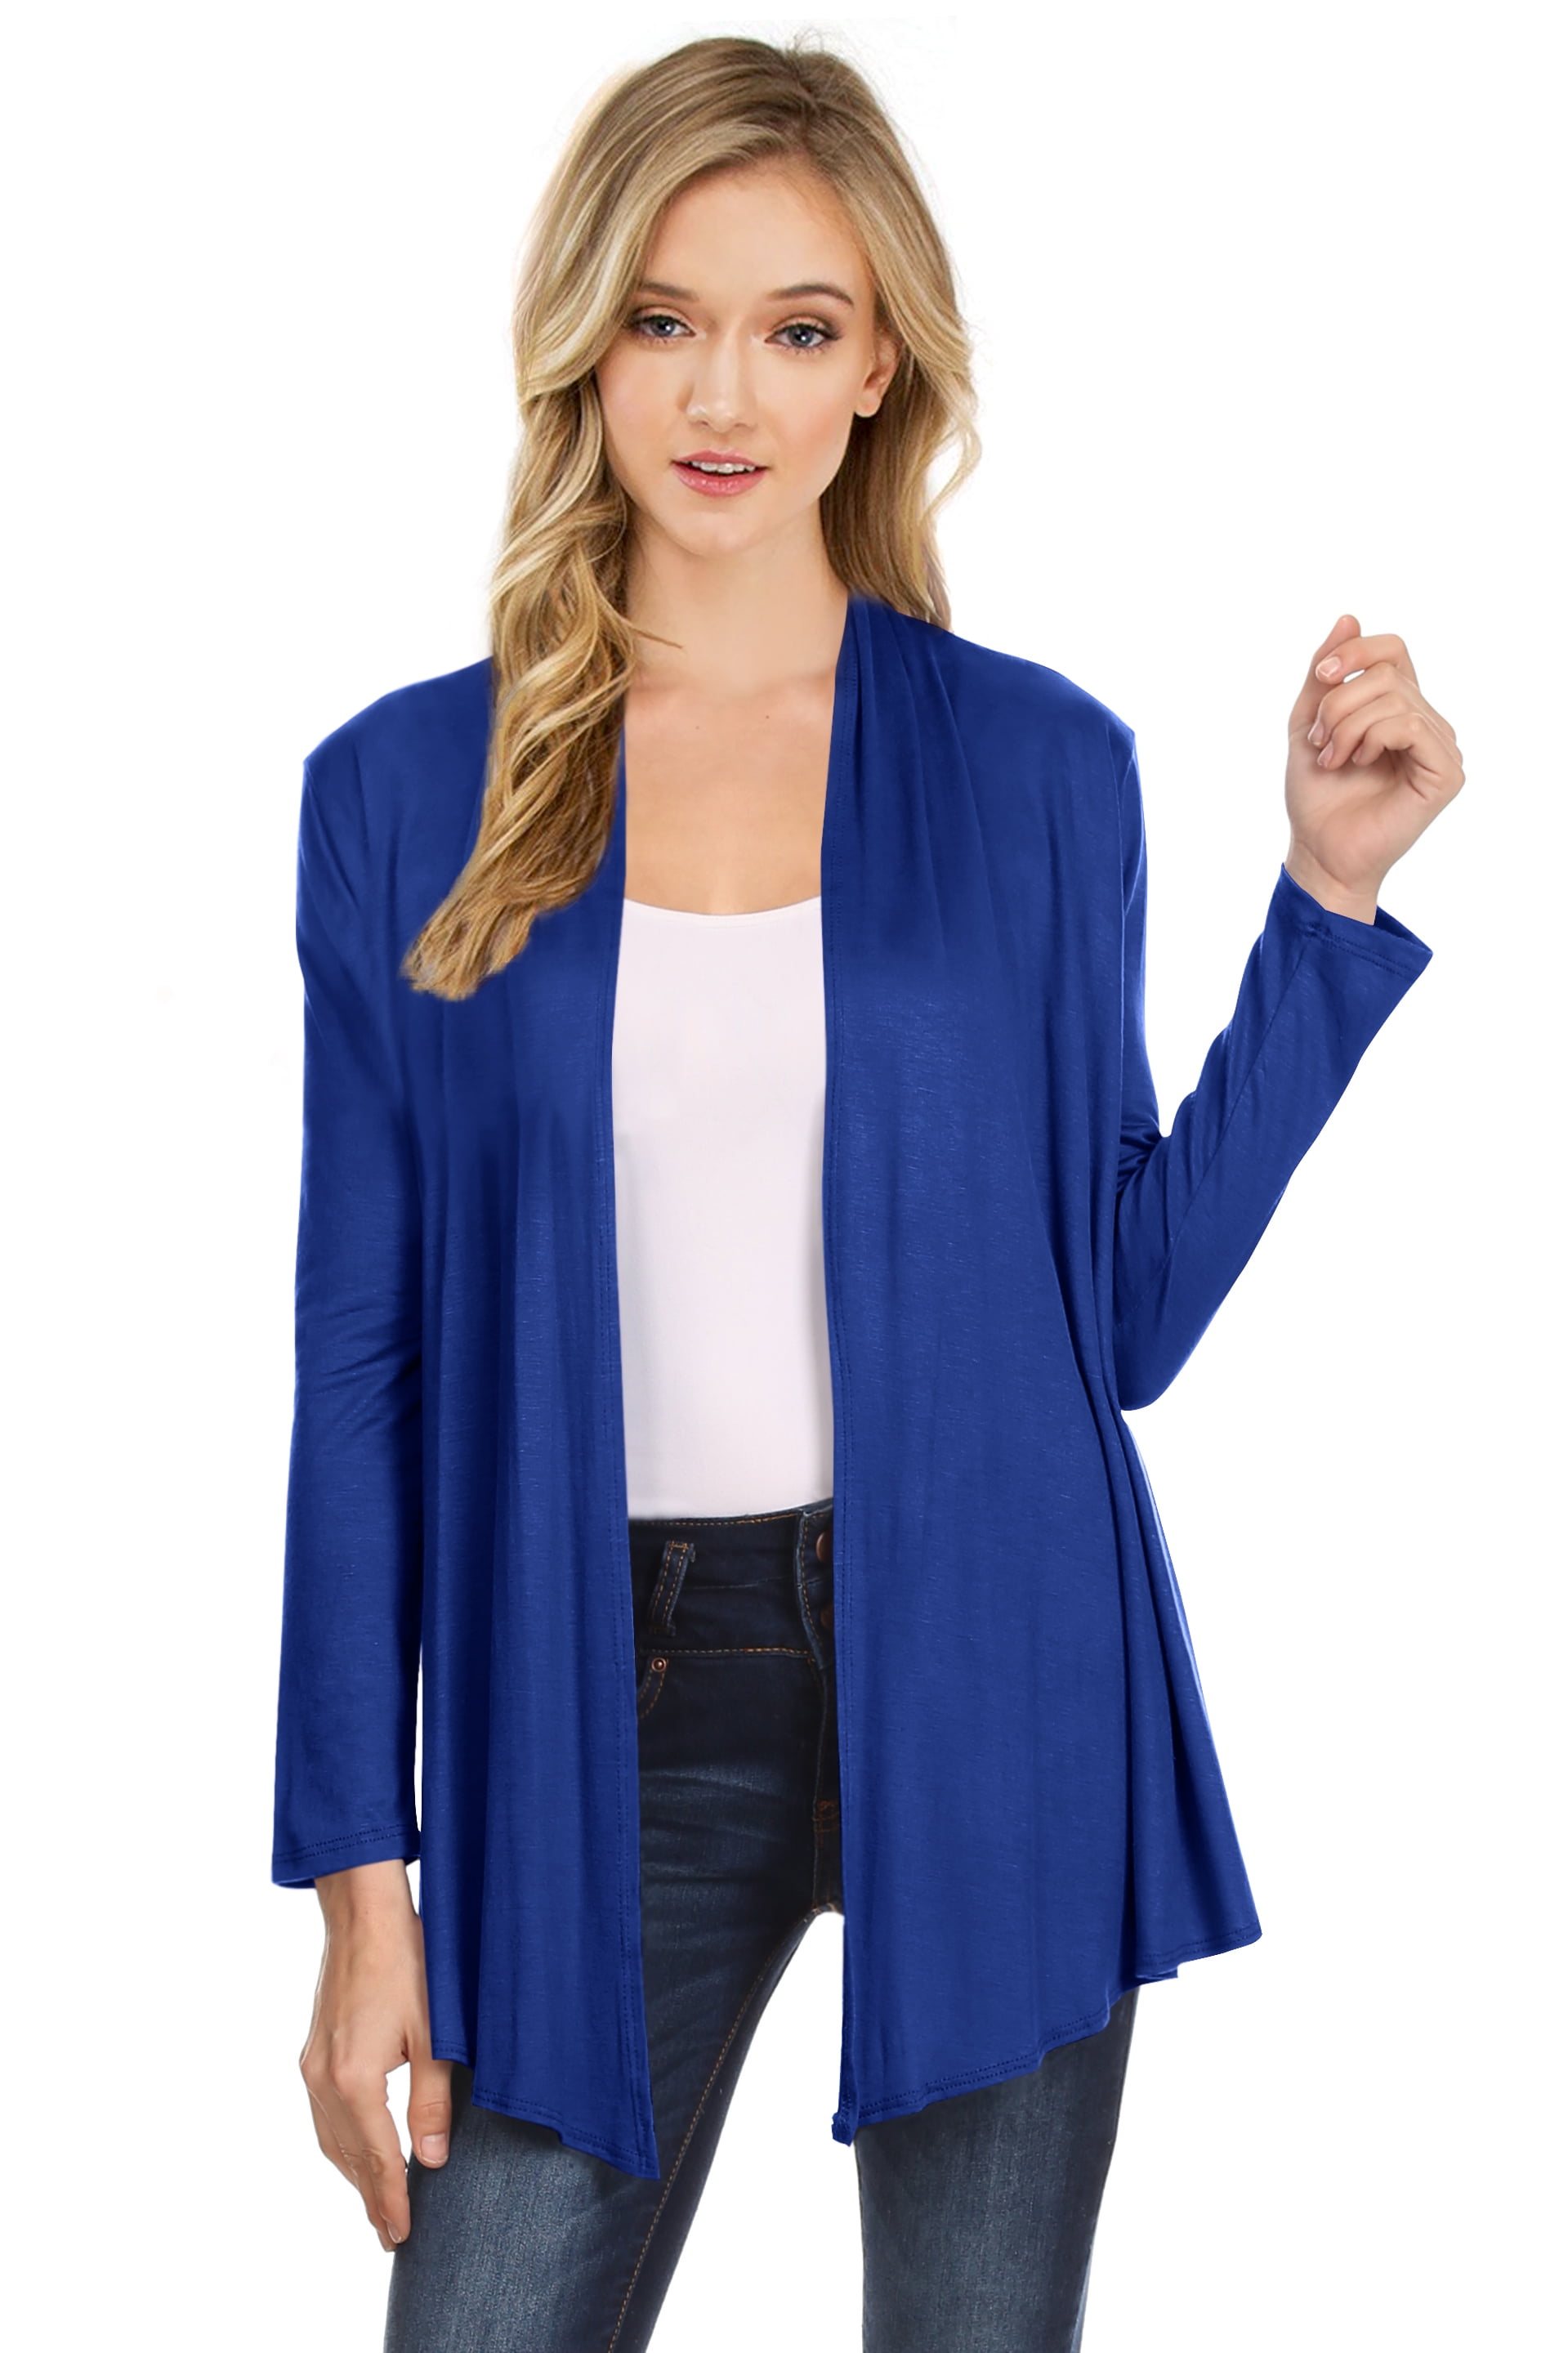 NYL Womens Long Sleeve Open Front Drape Cardigan - Made In USA, XX ...